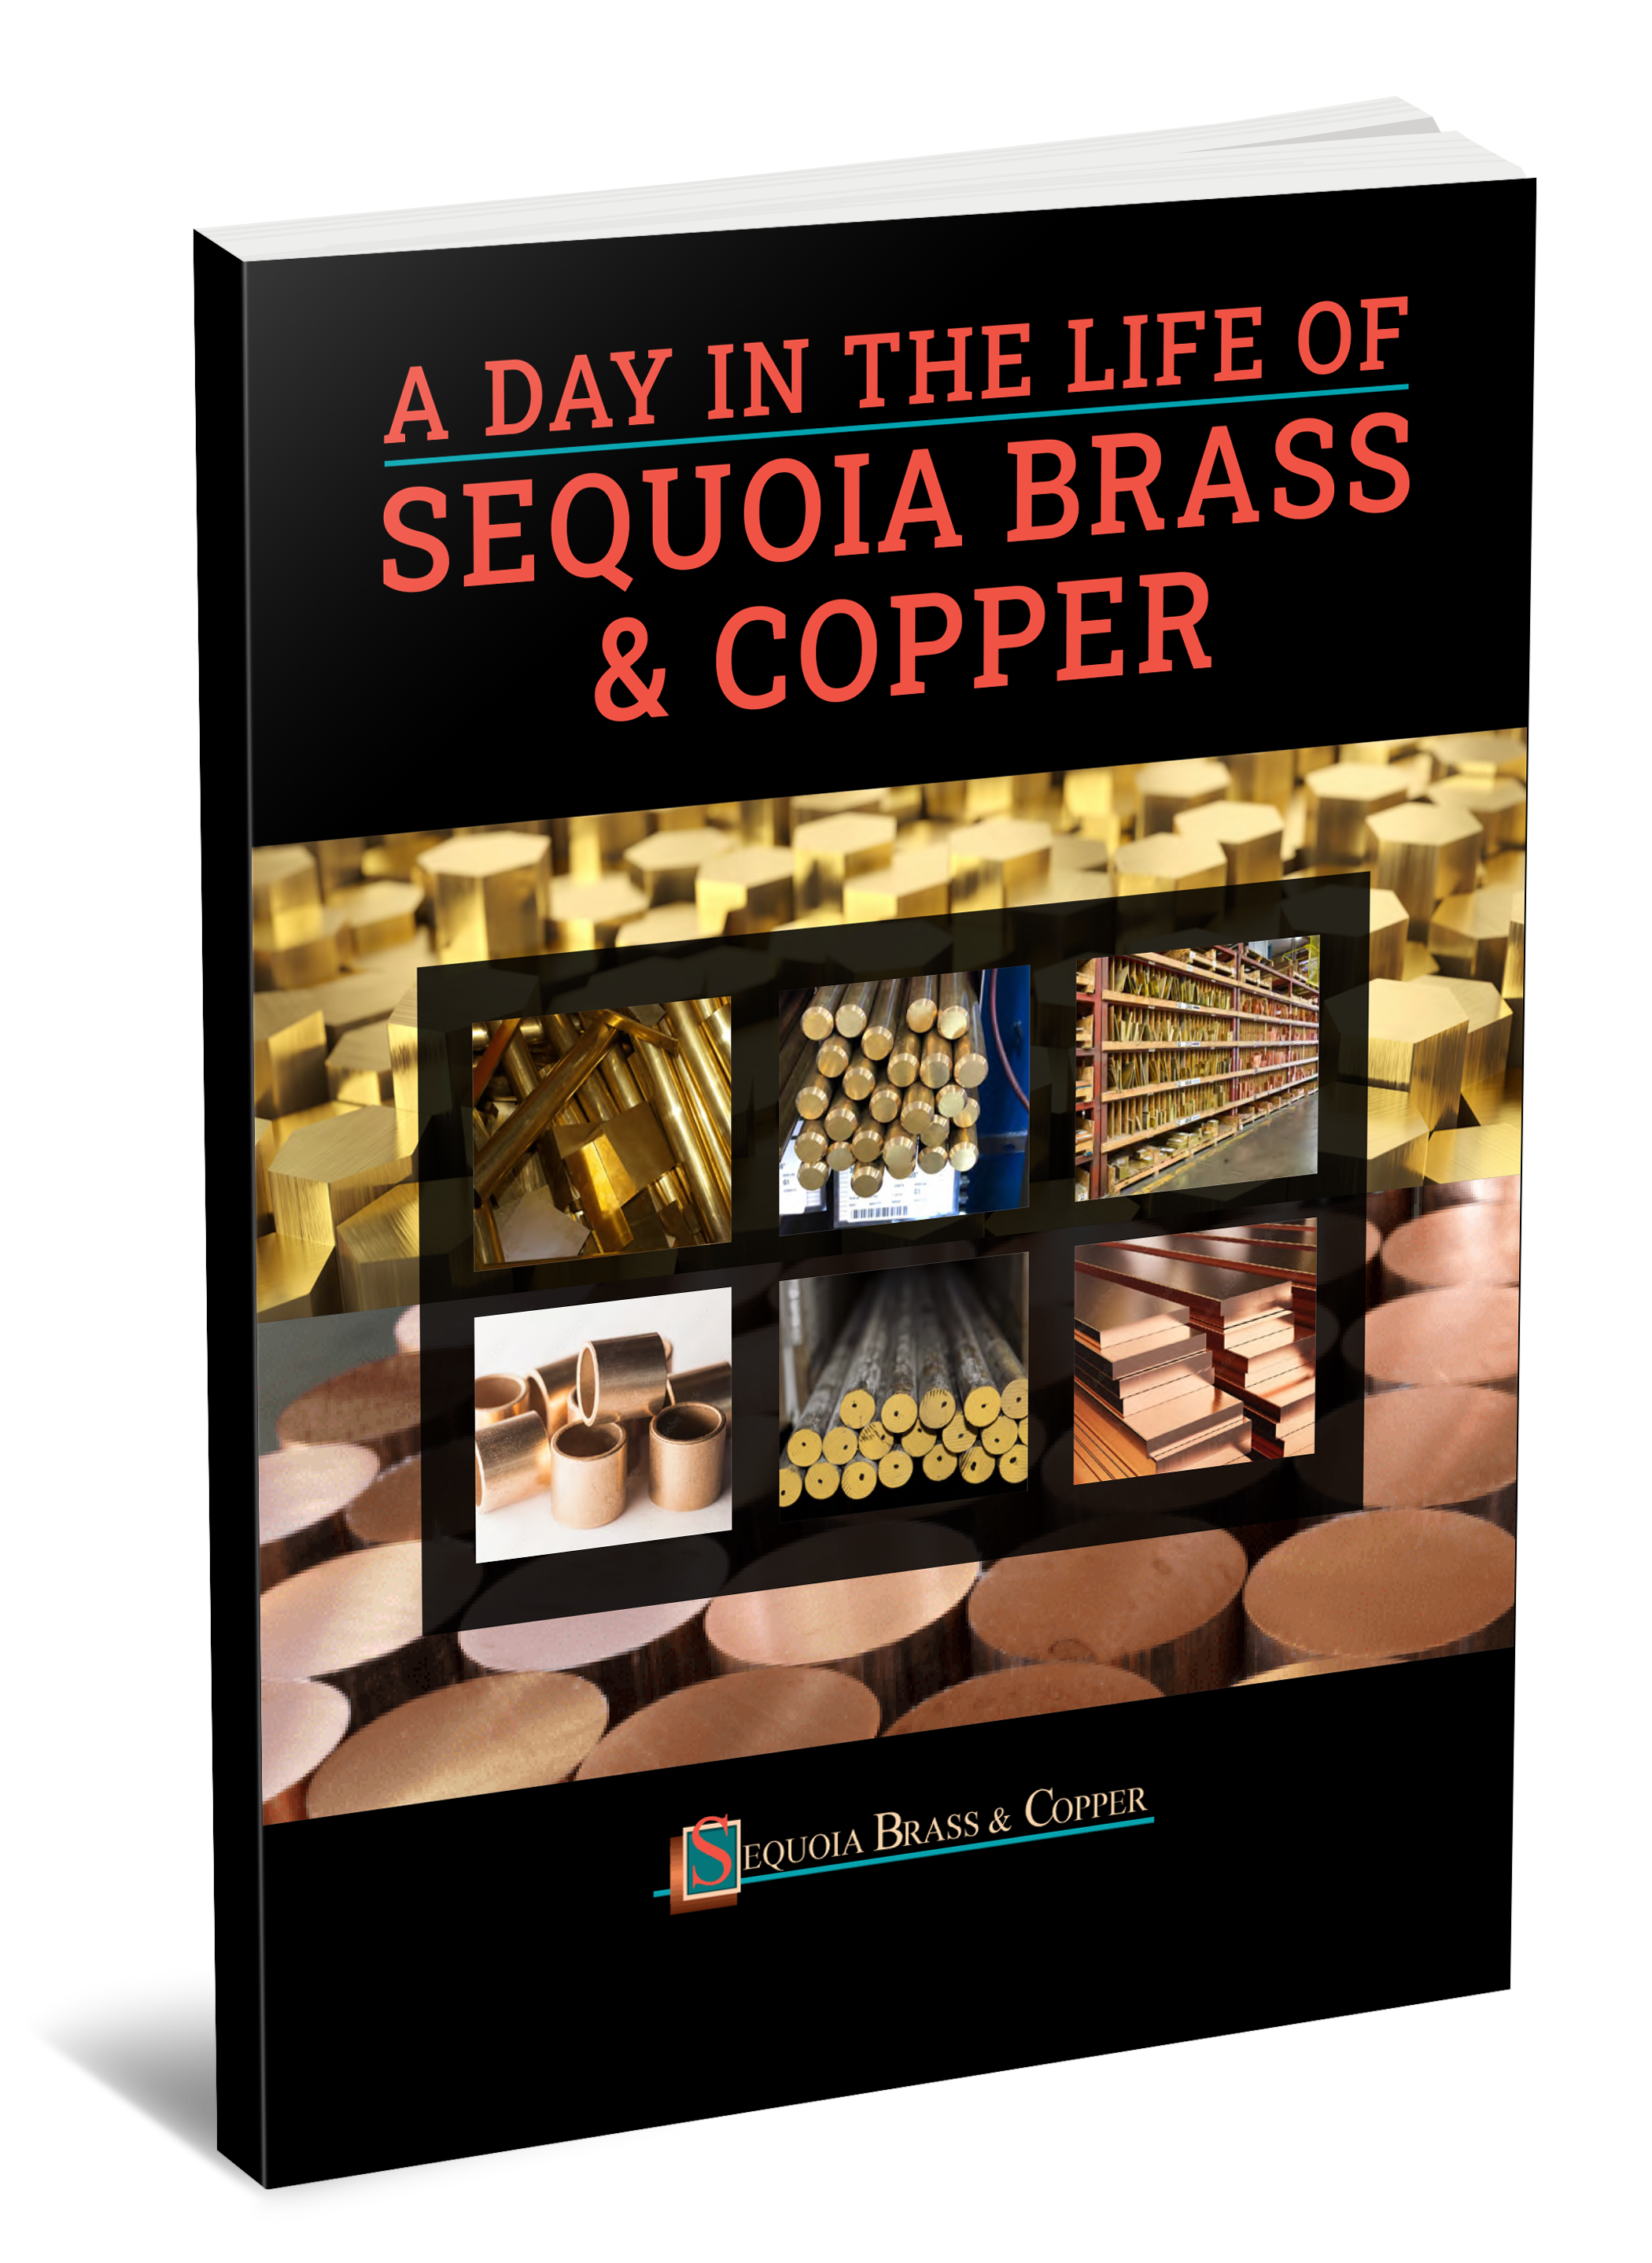 A Day in the Life of Sequoia Brass & Copper